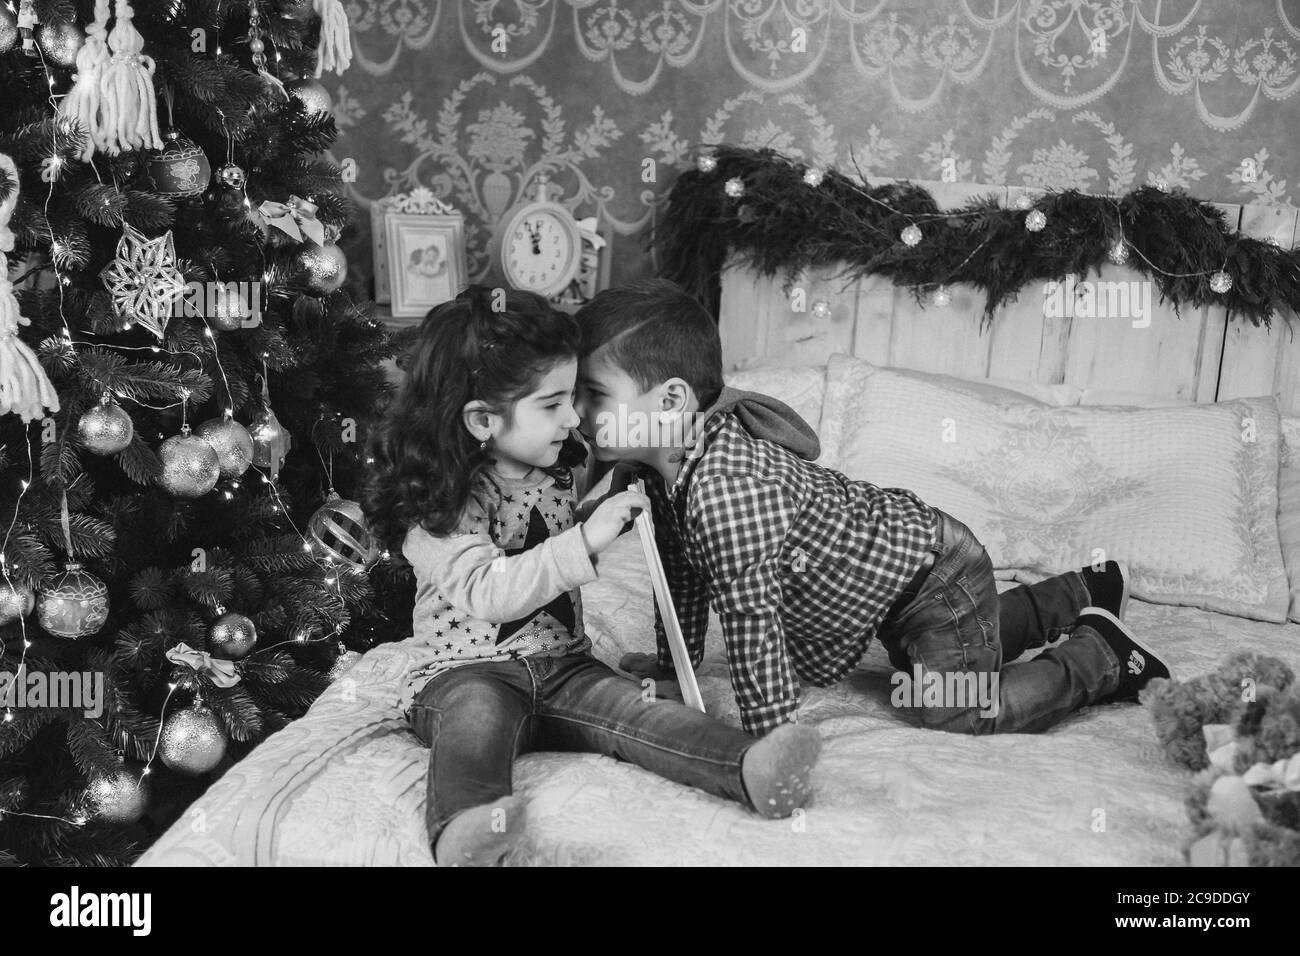 Christmas portrait of small kids sitting on bed with presents under the christmas tree. Boy is kissing the girl. Winter holiday Xmas and New Year Stock Photo